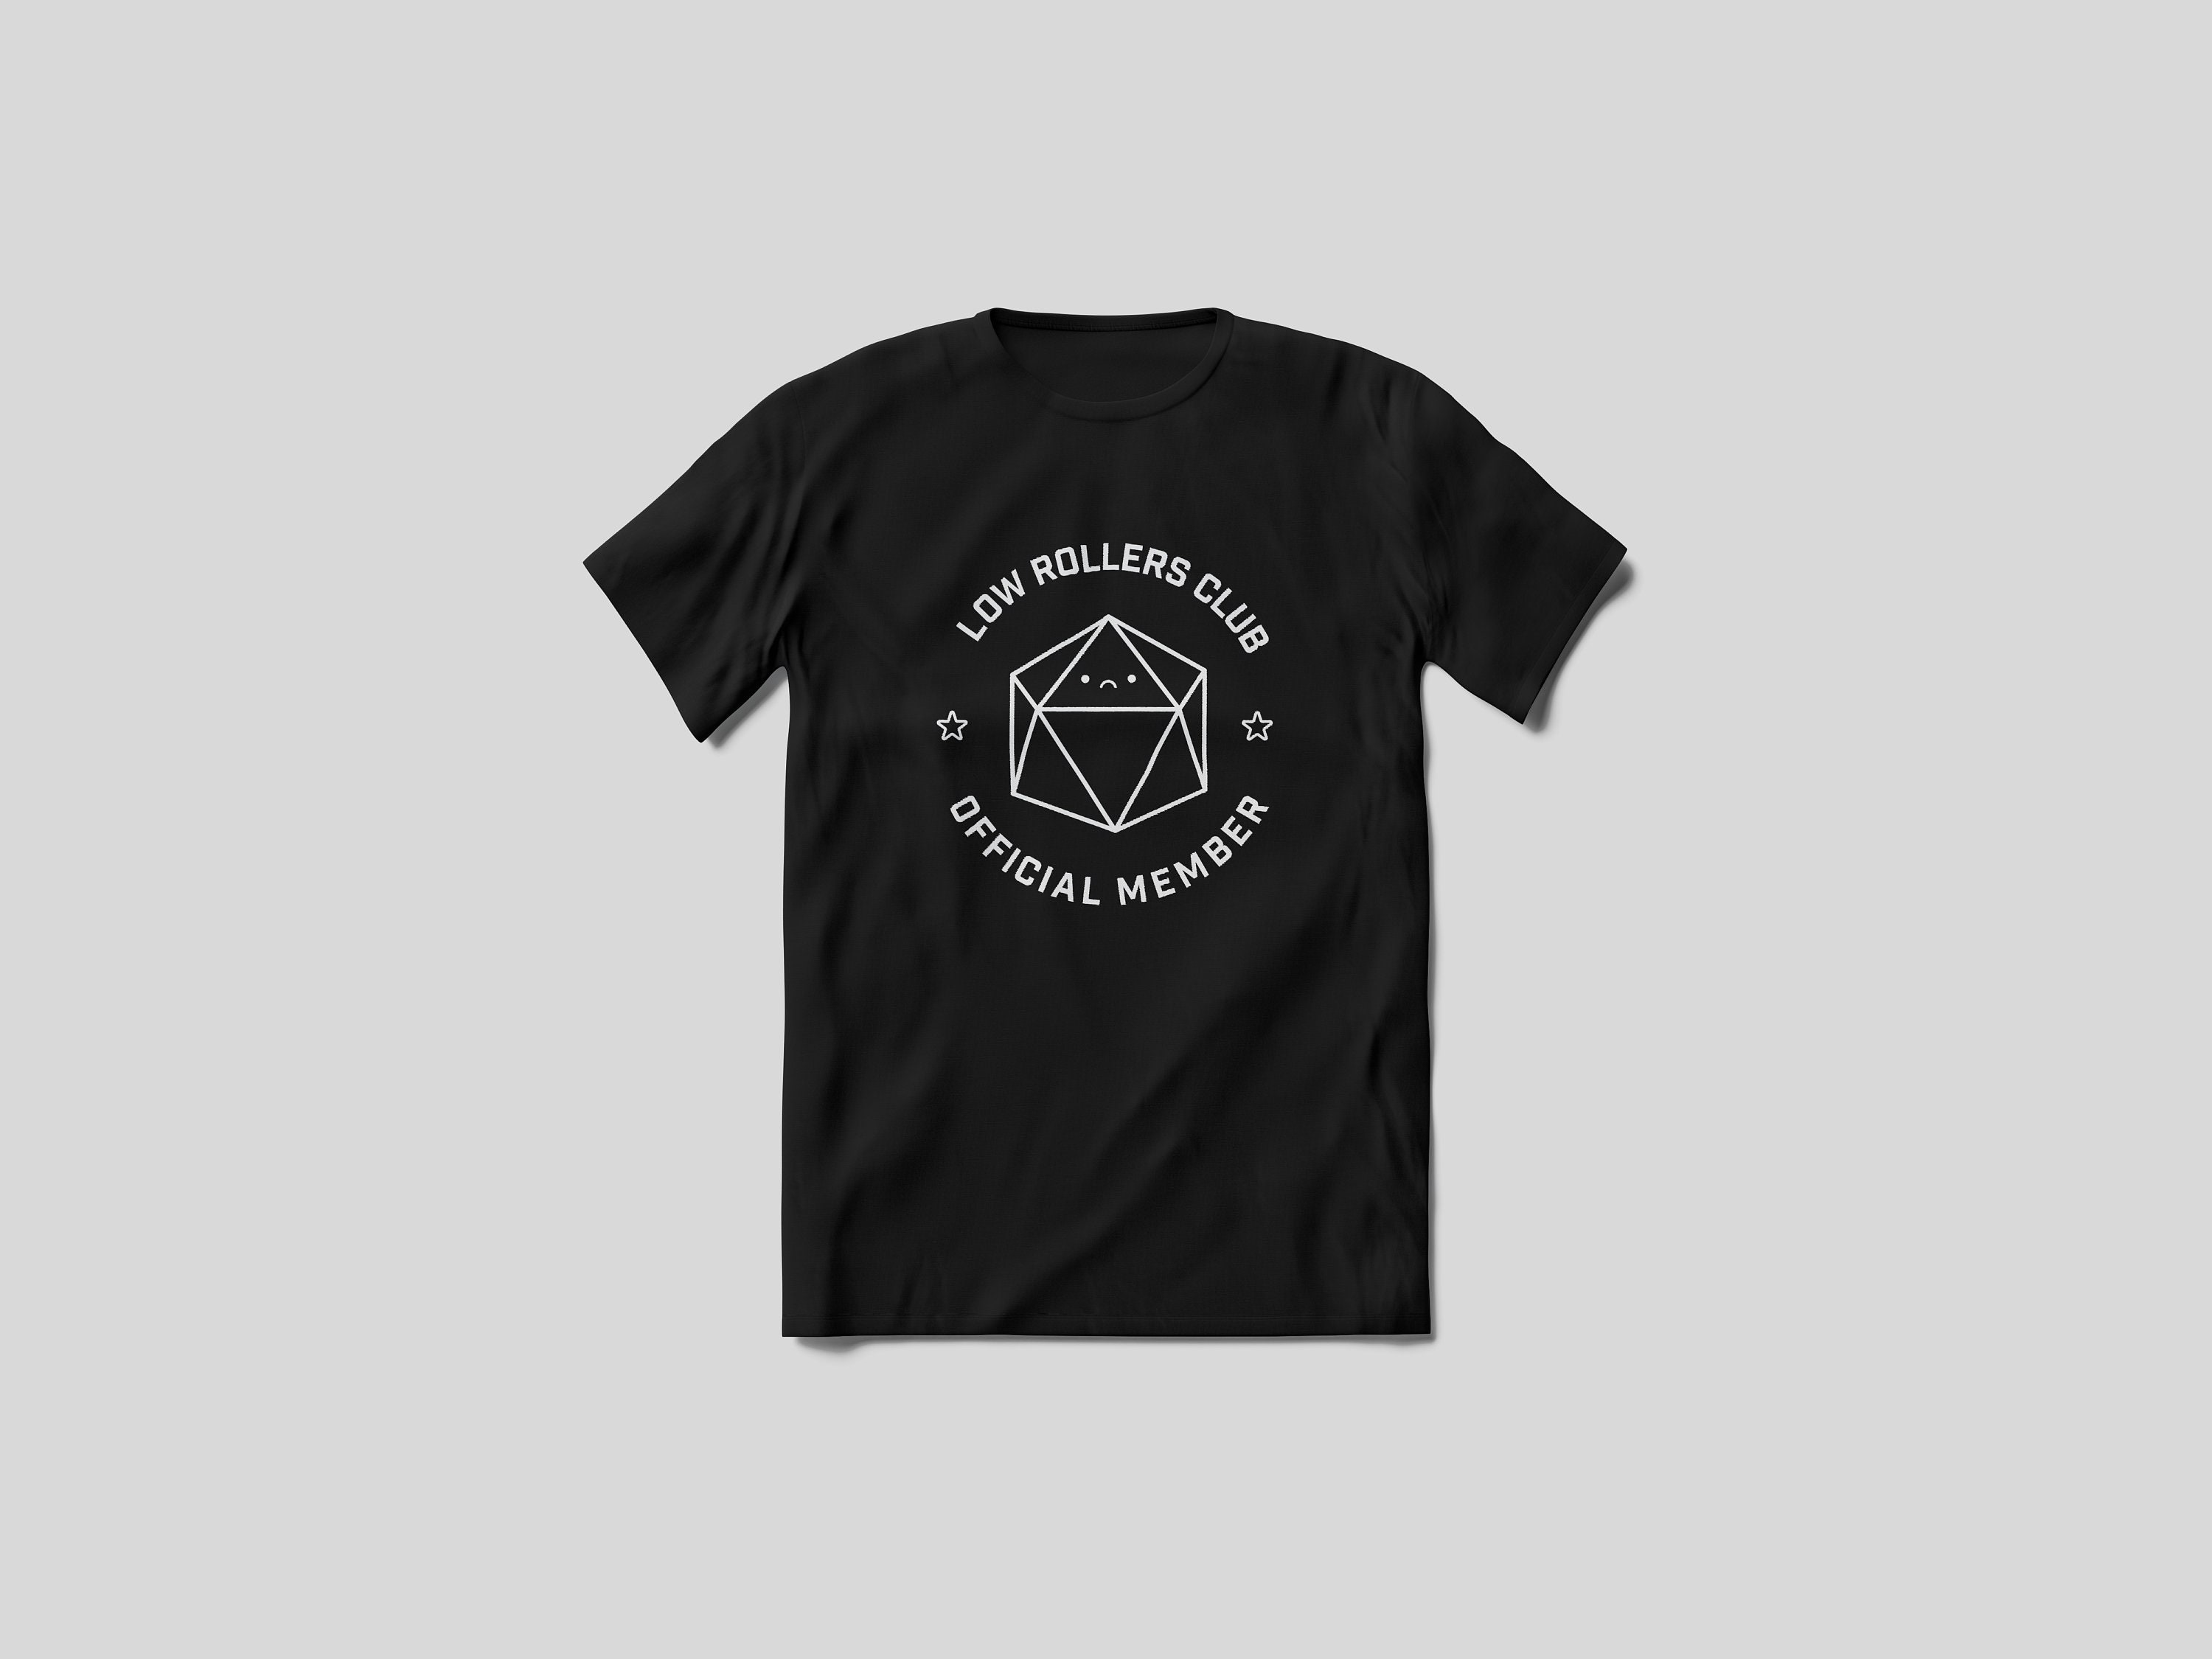 Low Rollers Club Official Member Sweatshirt and Tshirt Super Soft TTRPG  Apparel for Dungeons and Dragons Players Tiny Dice Buddies 